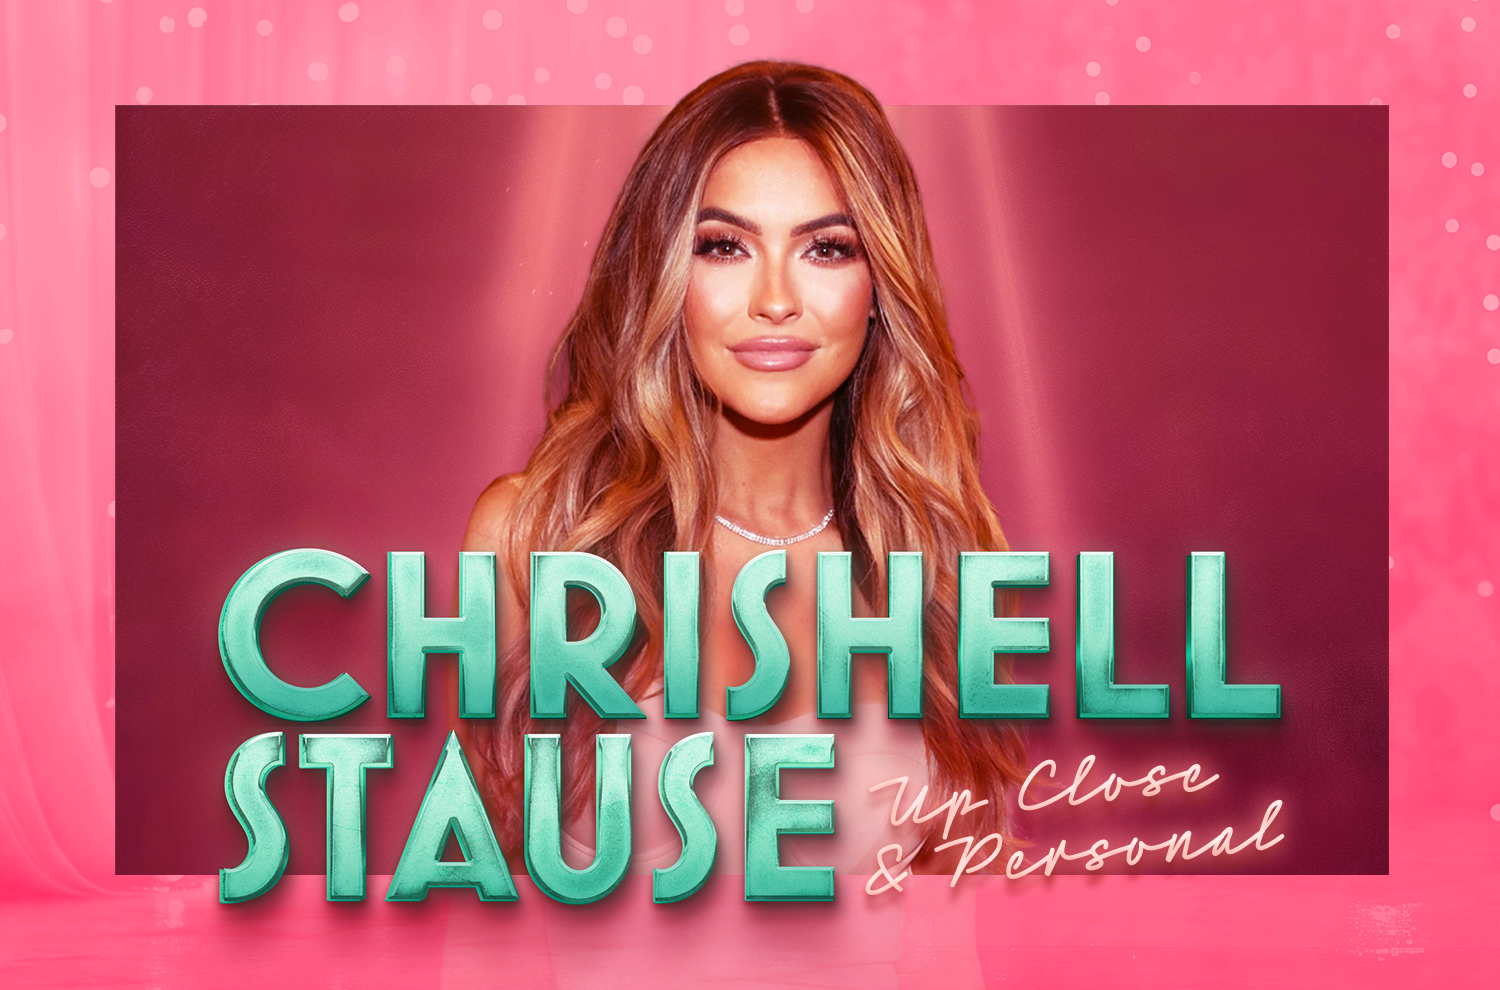 Chrishell Stause: Up Close and Personal photo from the show